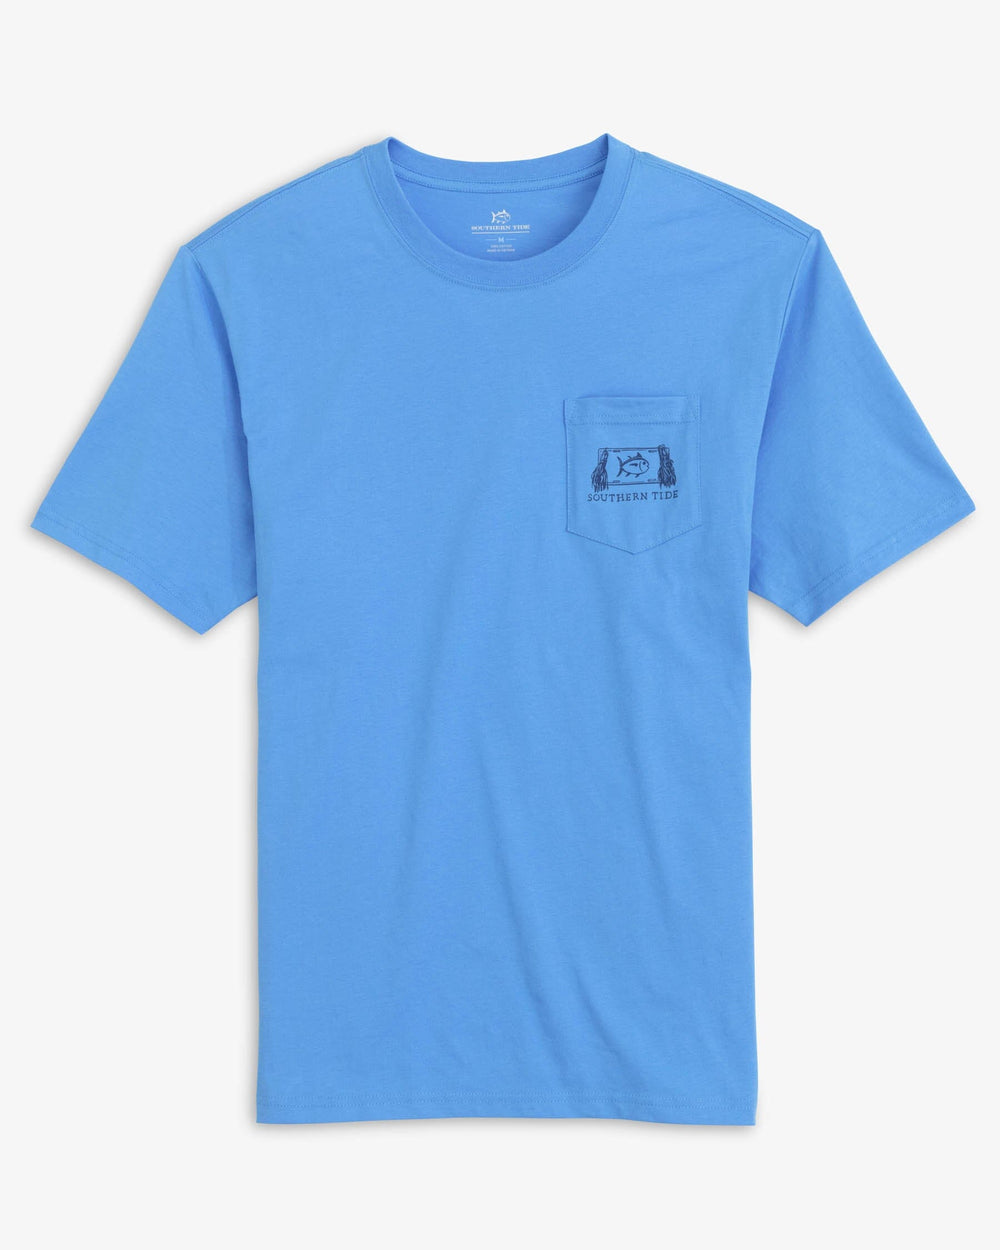 The front view of the Southern Tide Trophy Room T-Shirt by Southern Tide - Boat Blue